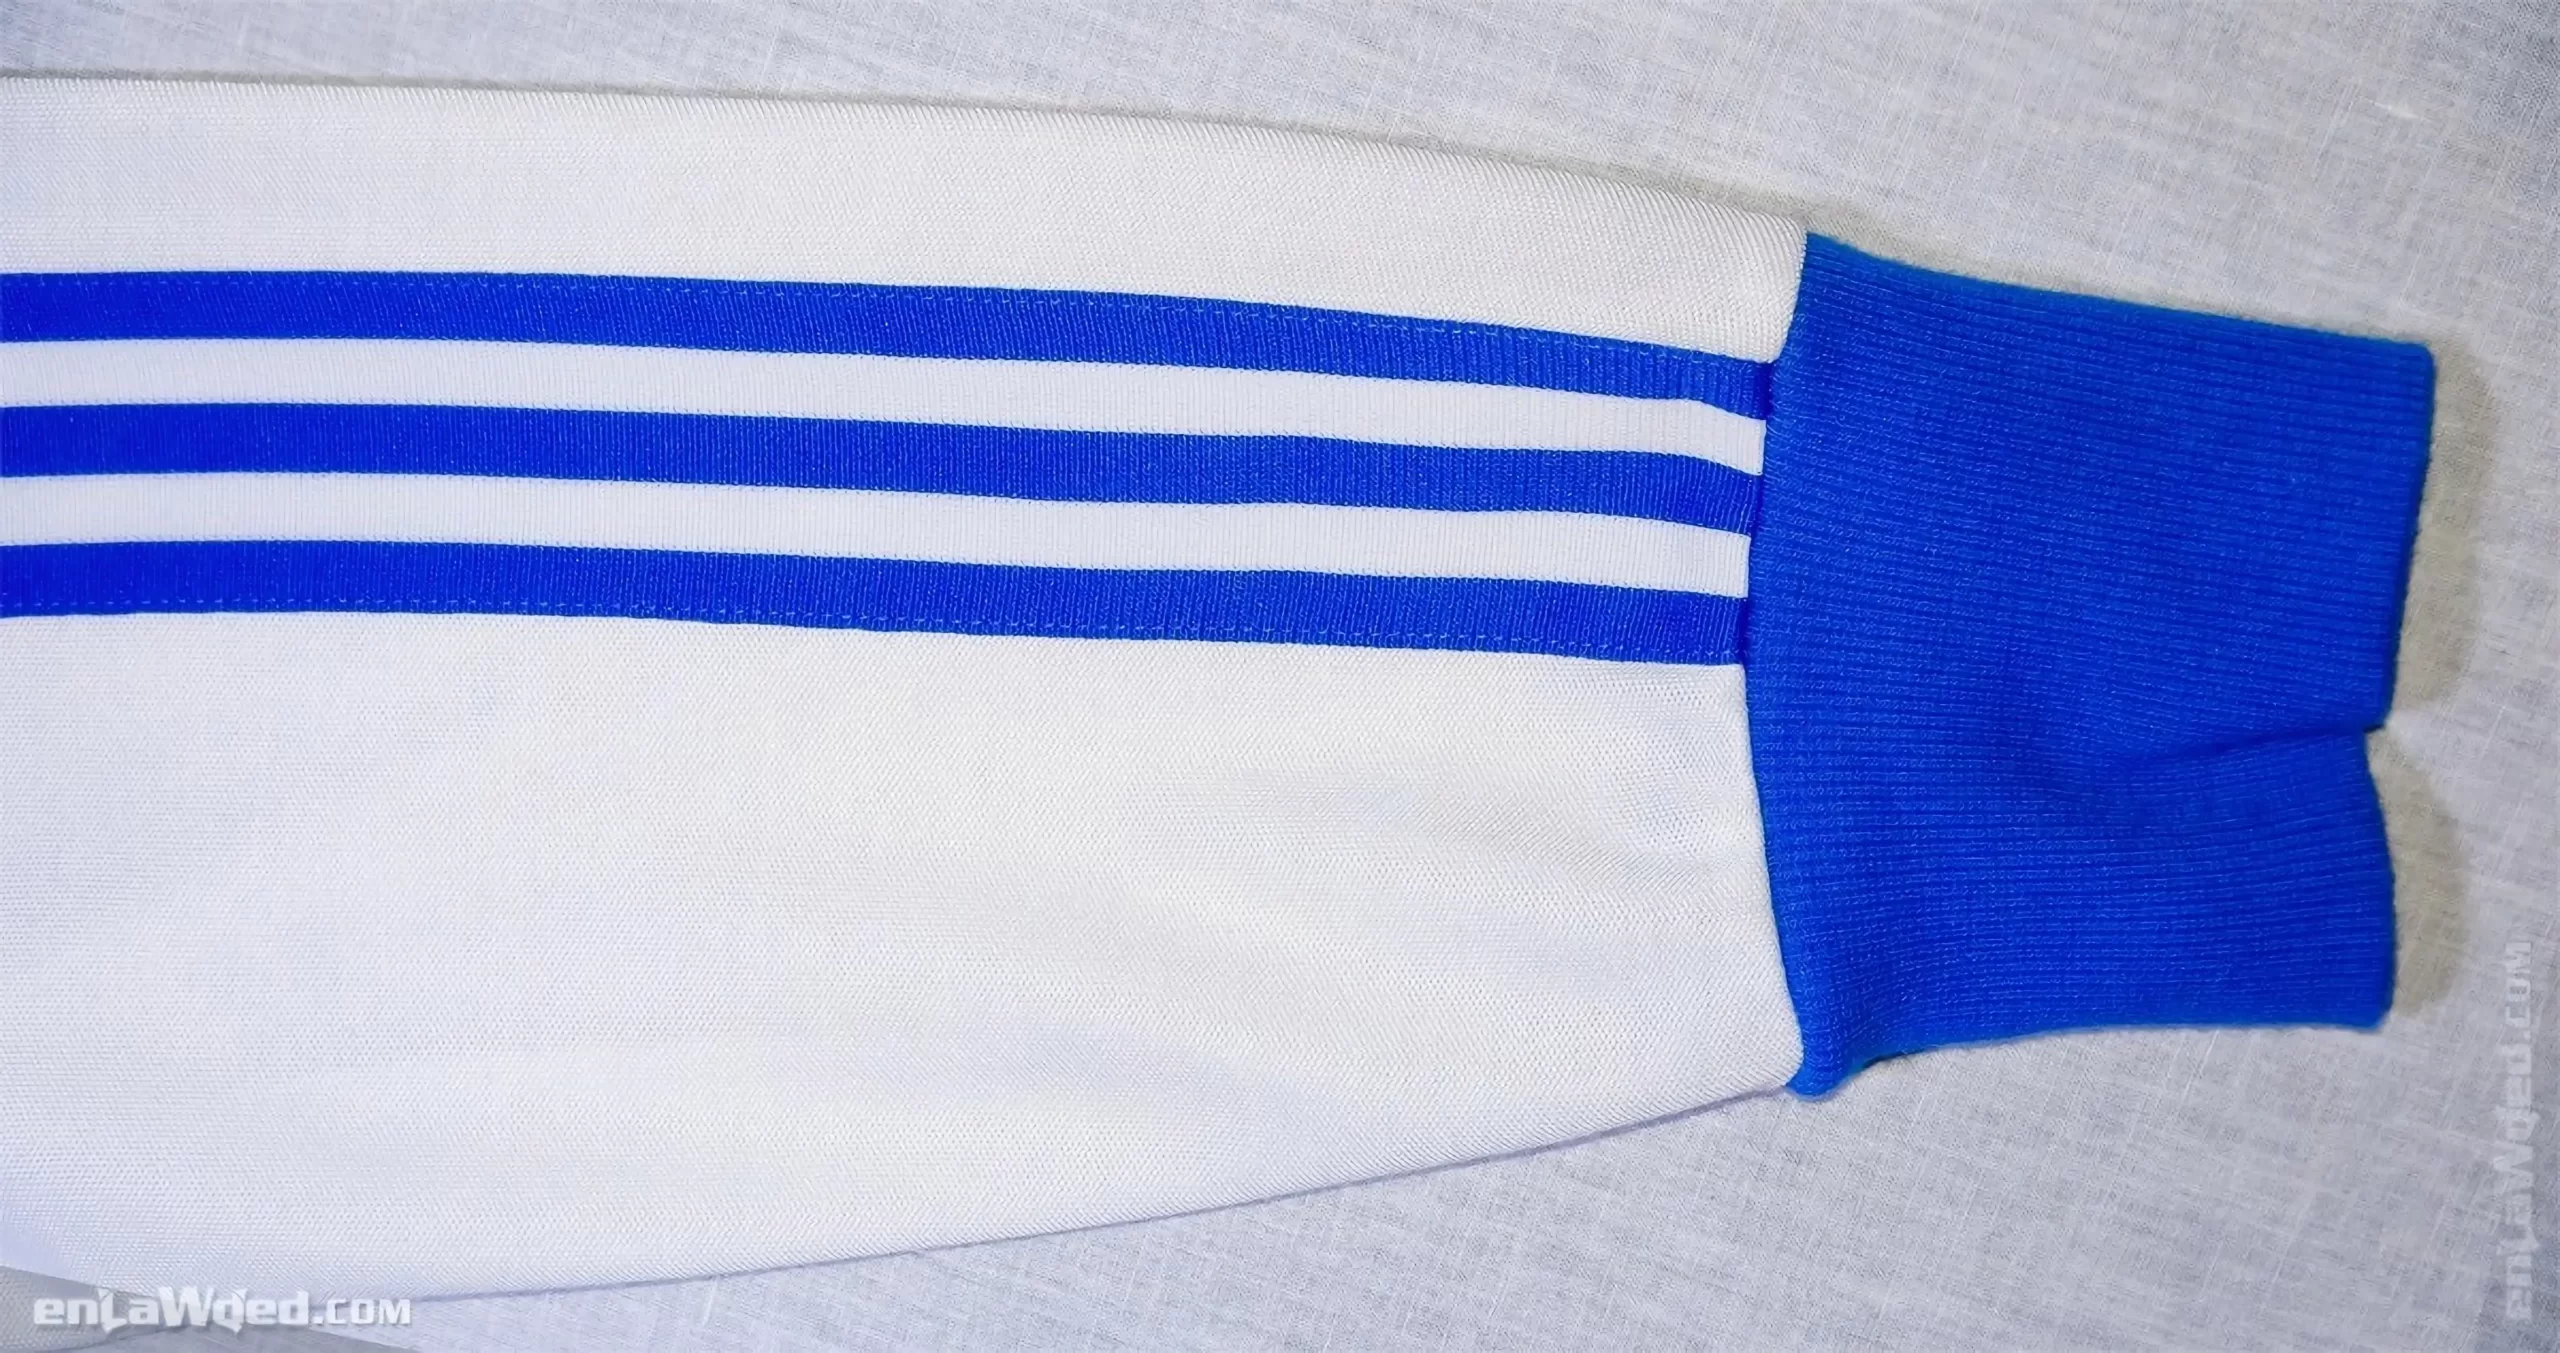 Men’s 2003 Greece Track Top by Adidas: Natural (EnLawded.com file #lmch4jibs866r7y2nce)